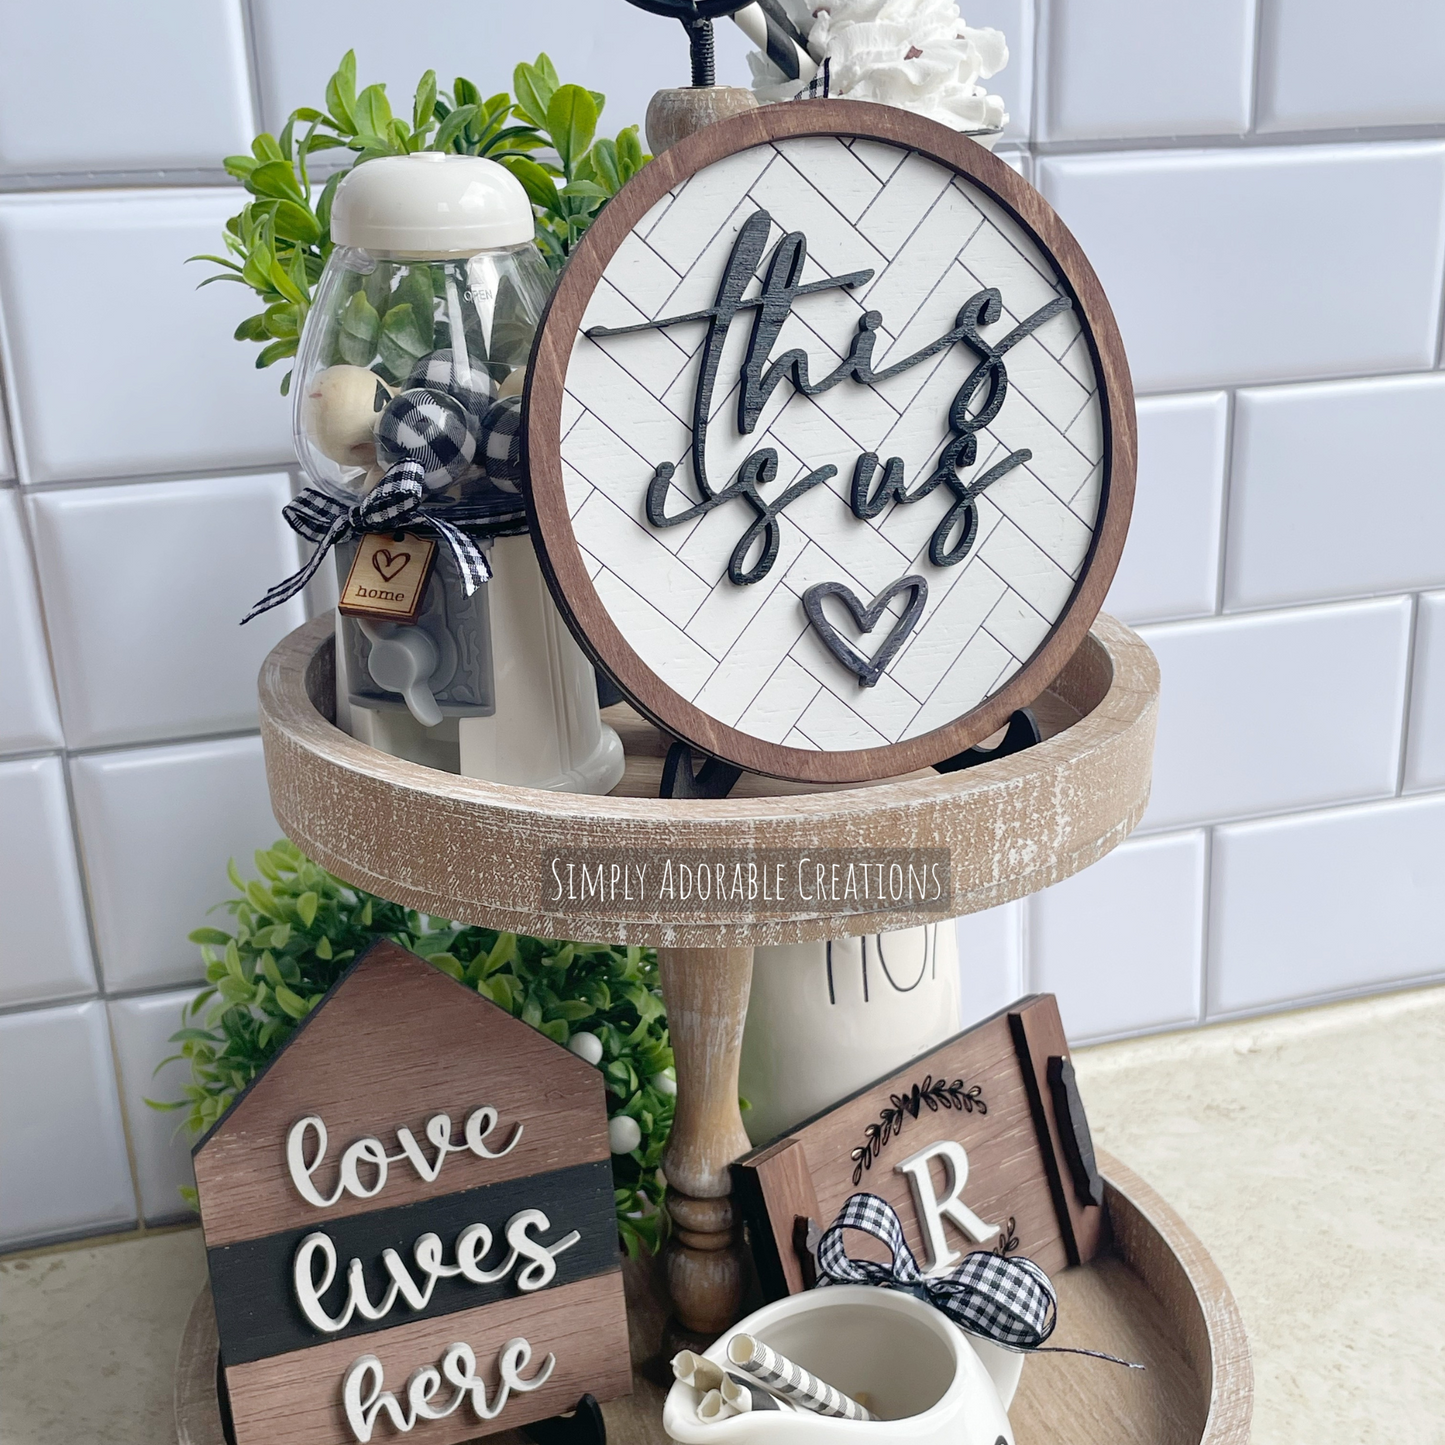 Every Day Tiered Tray Decor Accessory Bundle